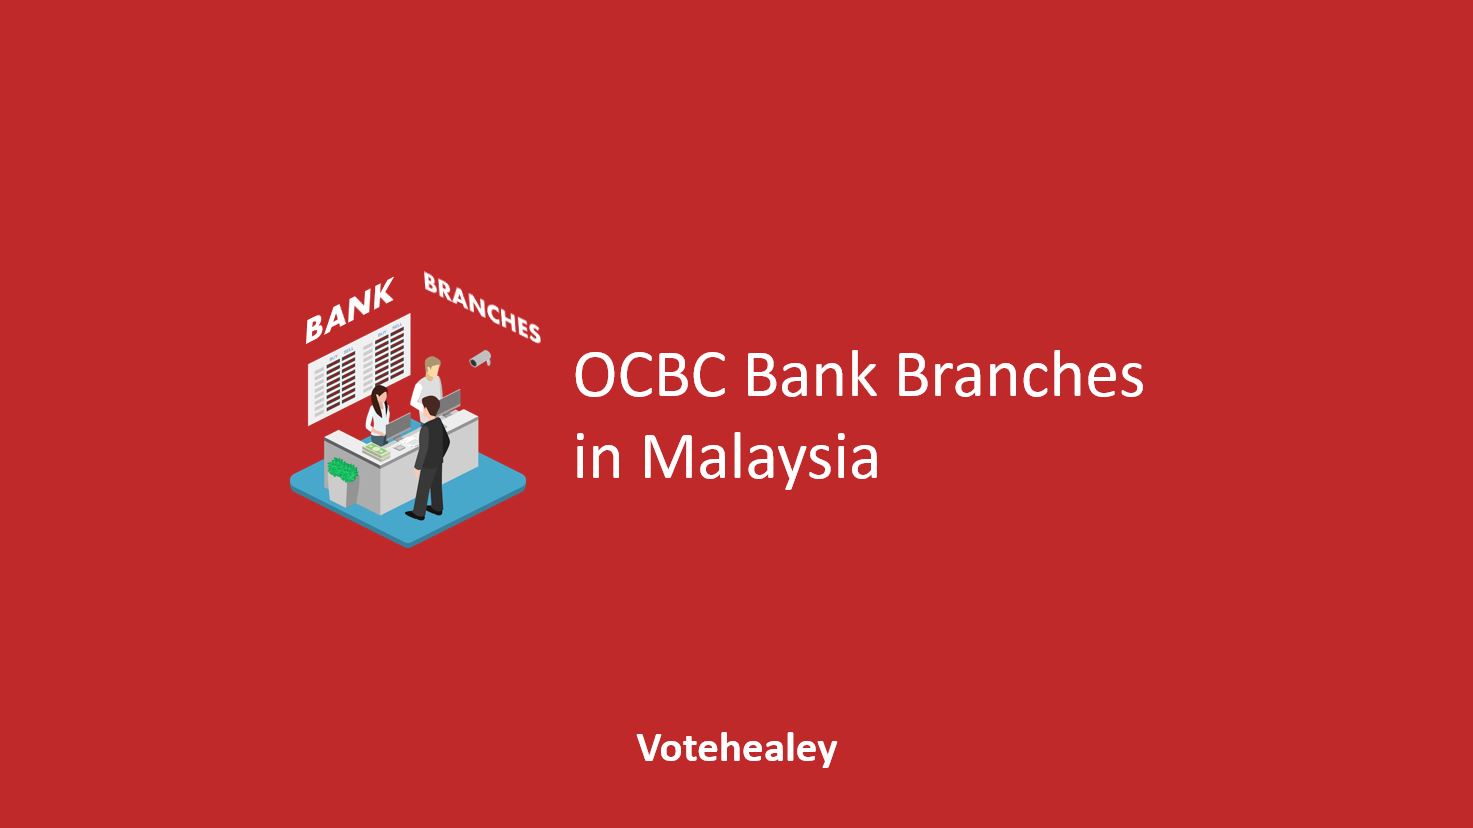 OCBC Bank Branches in Malaysia